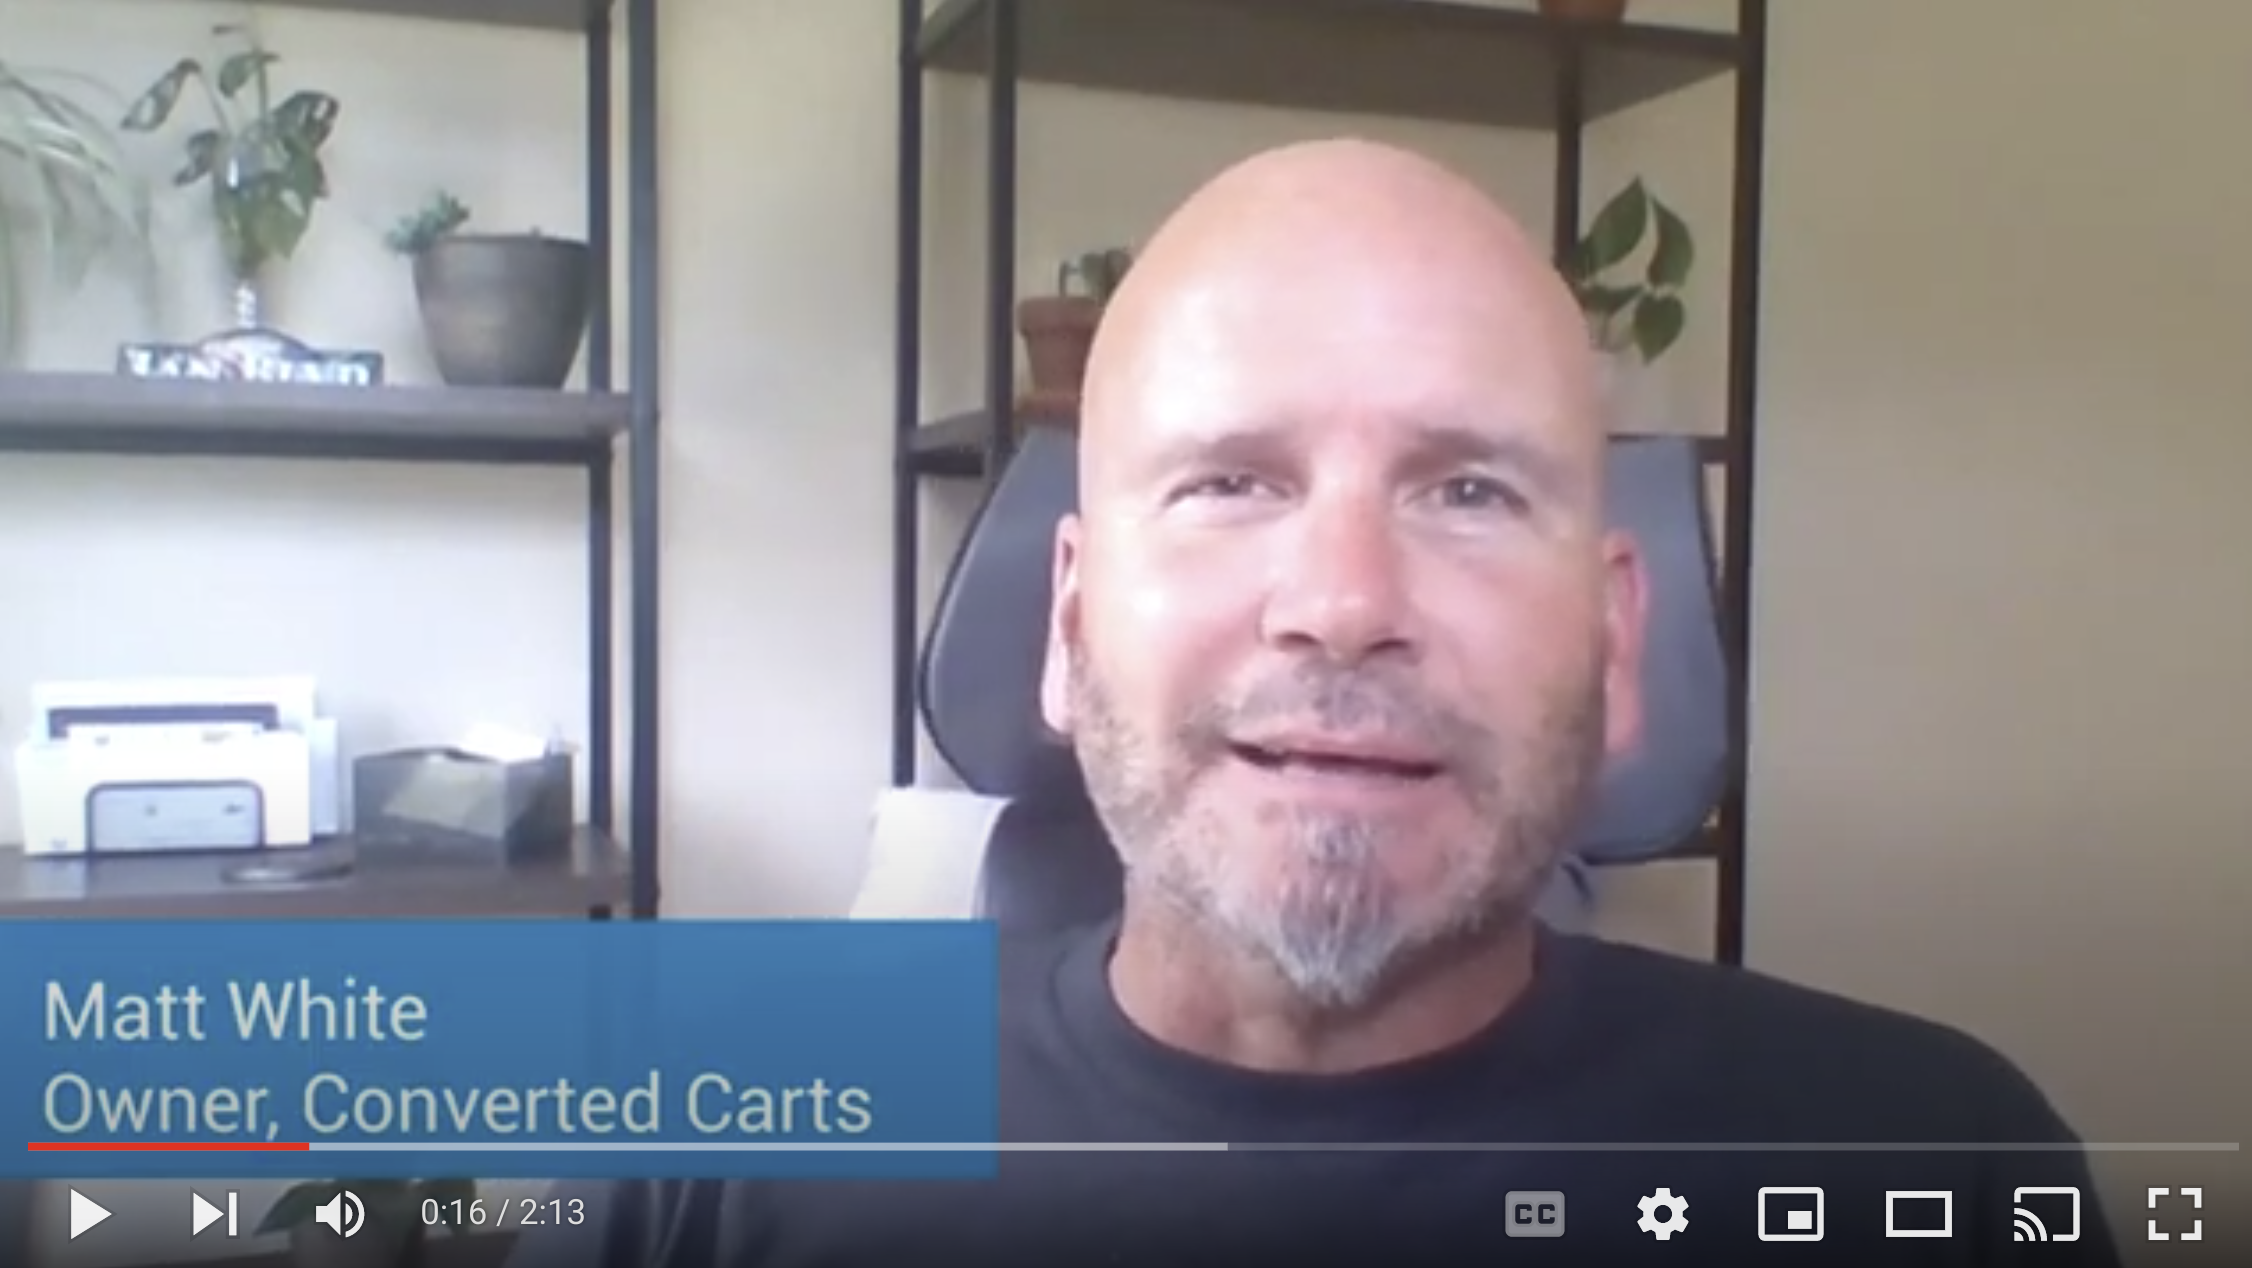 A Message from the Owner of Converted Carts